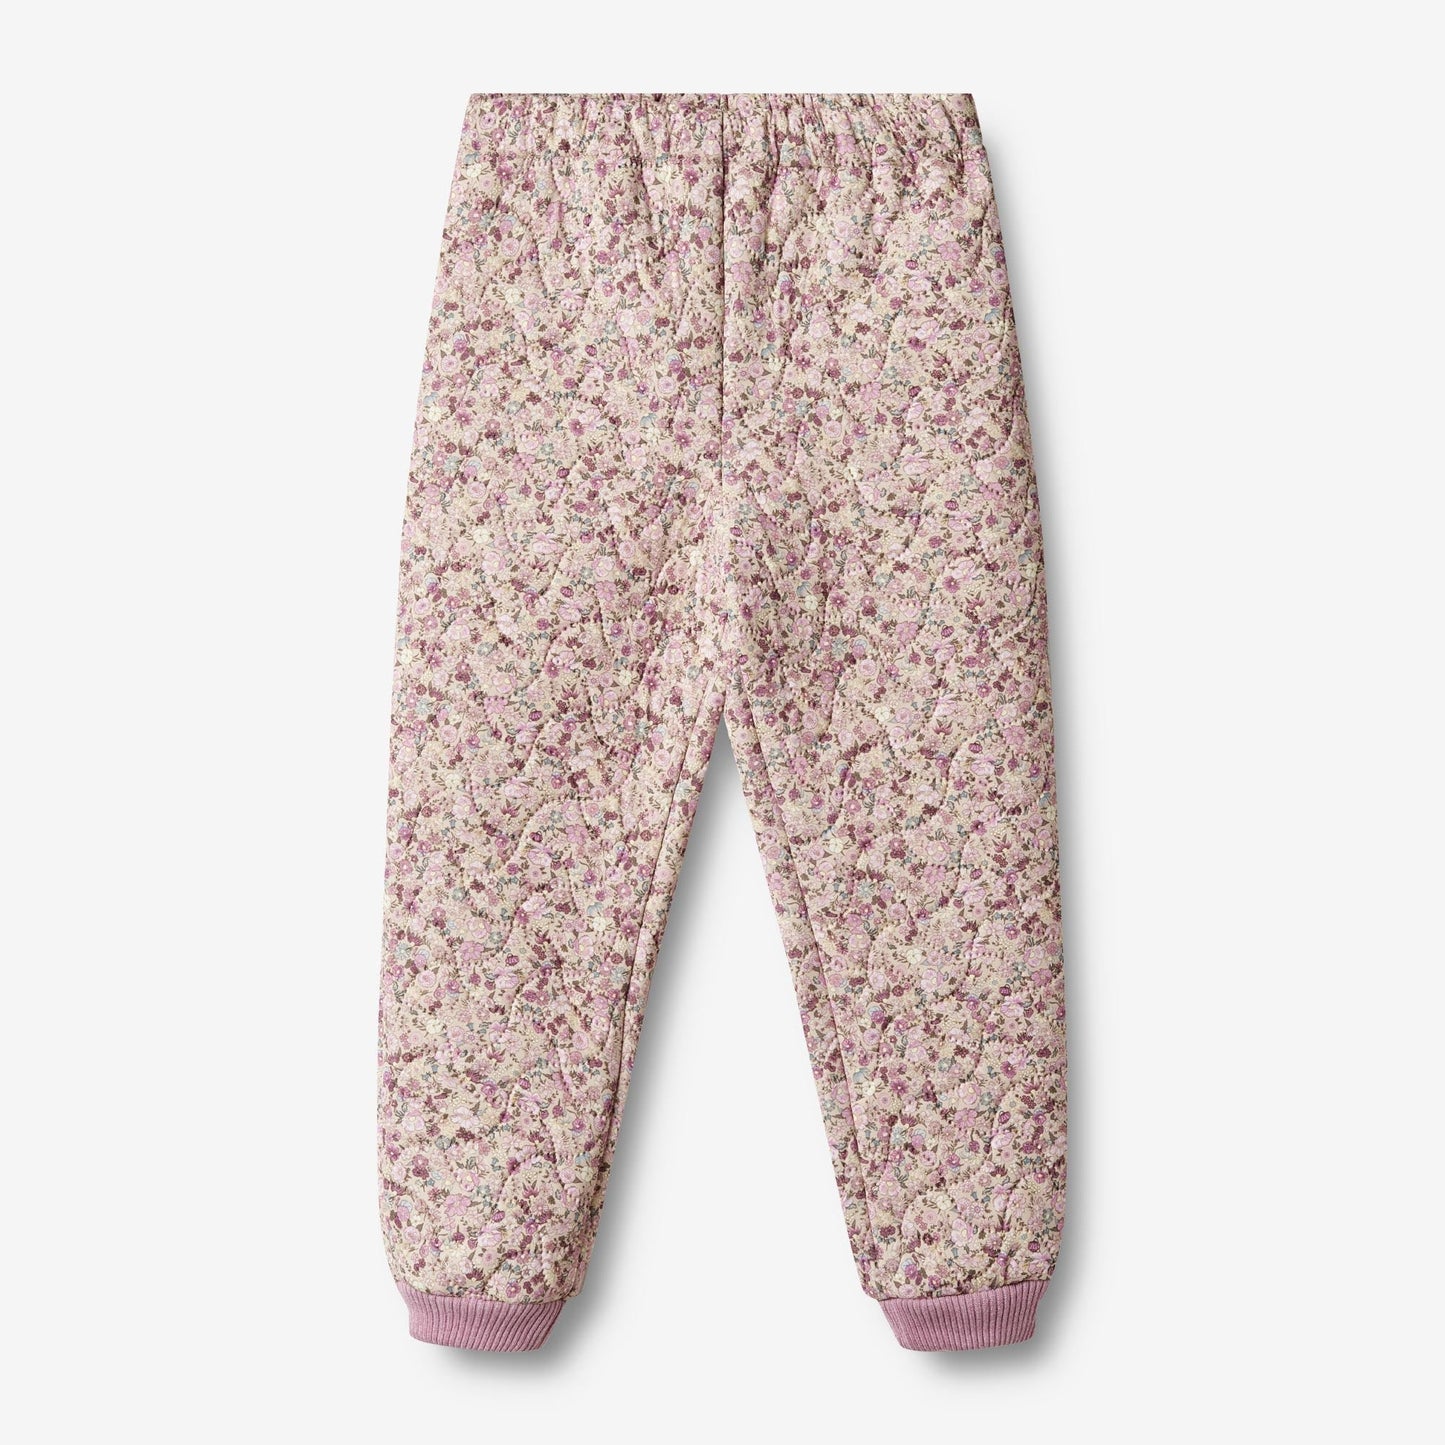 Wheat 'Alex' Children's Thermo Pants - Clam Multi Flowers